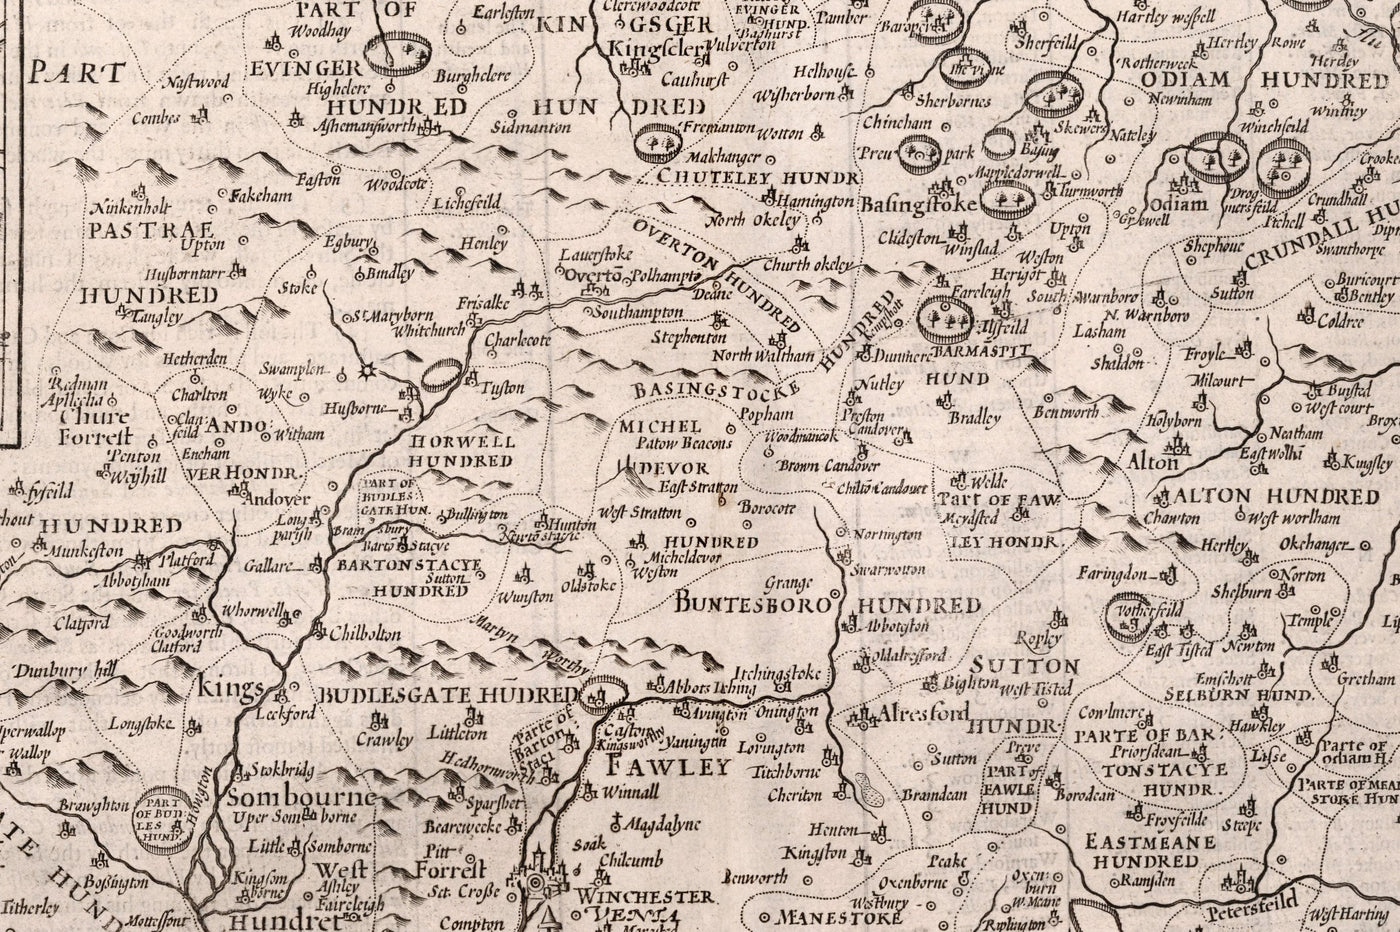 Old Map of Hampshire, 1611 by John Speed -  Winchester, Portsmouth, Southampton, Basingstoke